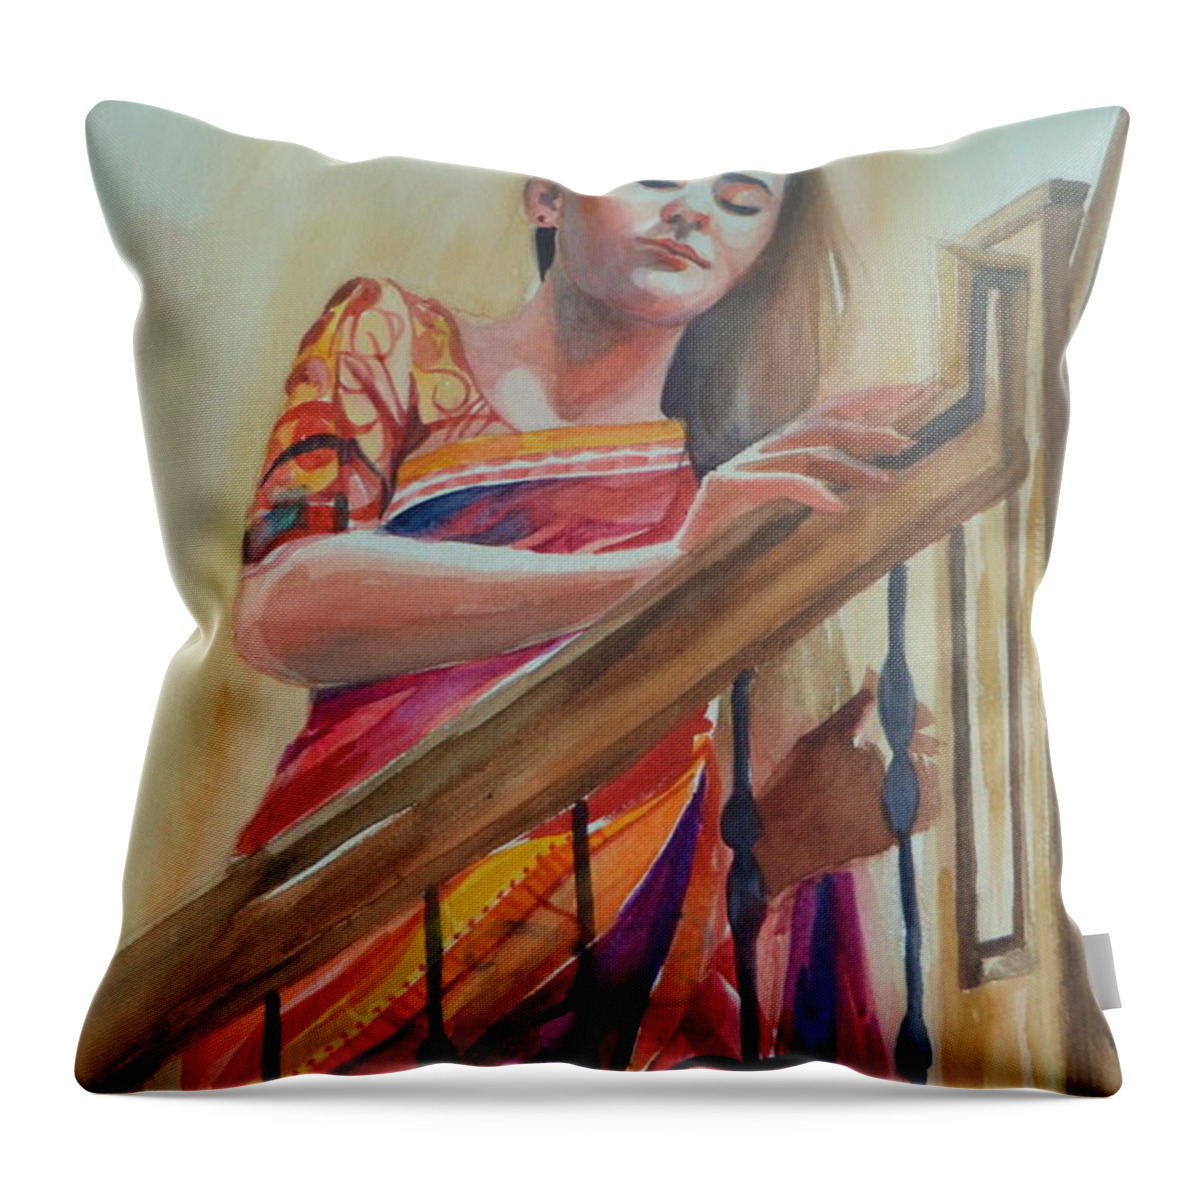 Romance Throw Pillow featuring the drawing Romance is in the air by Parag Pendharkar